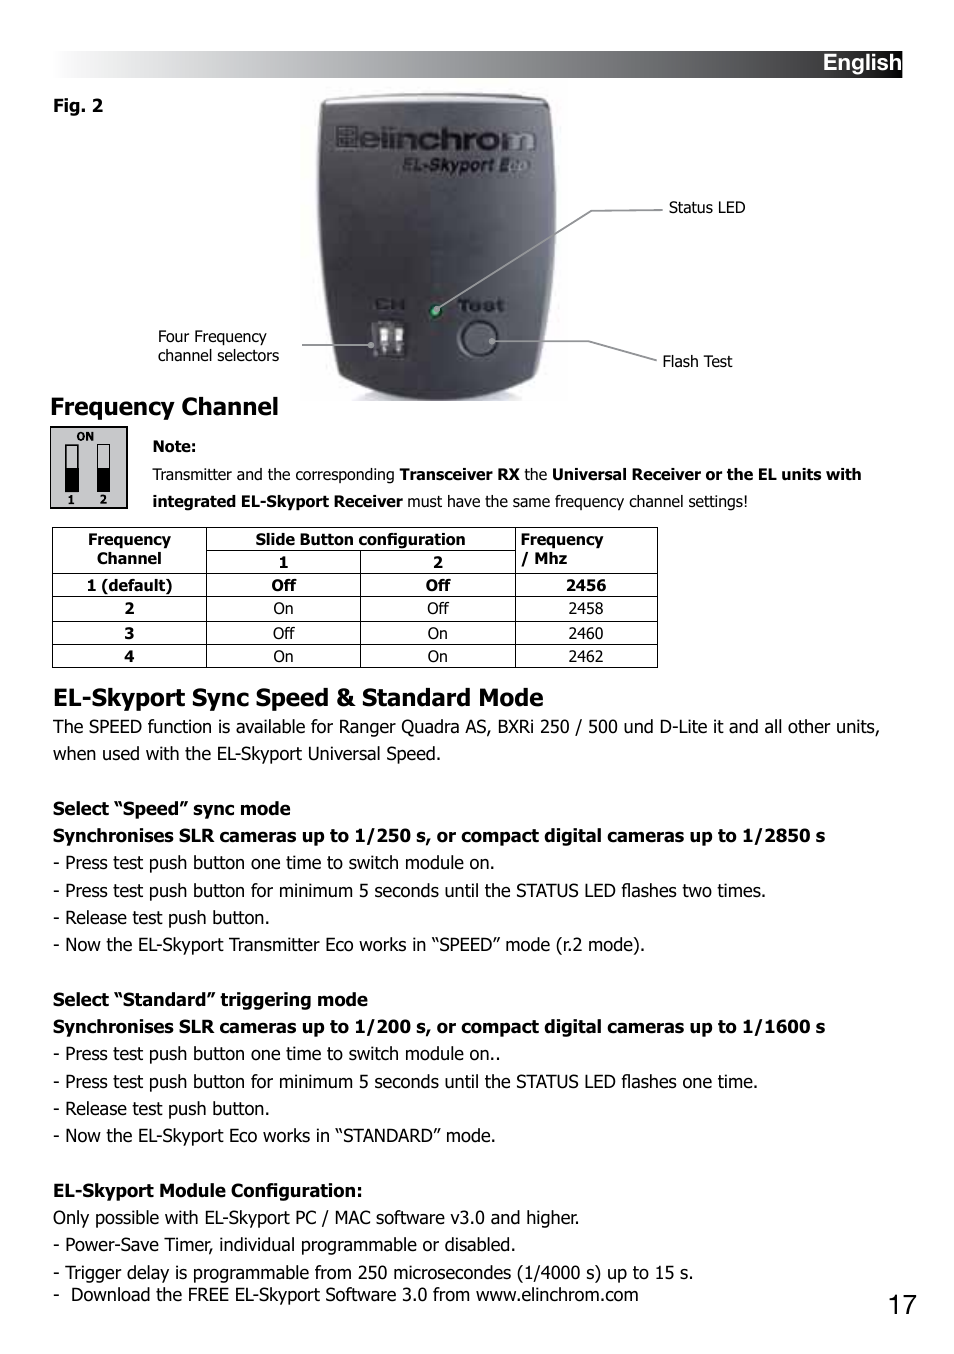 Frequency channel, El-skyport sync speed & standard mode, English | Elinchrom  D-LITE 2 IT User Manual | Page 18 / 125 | Original mode